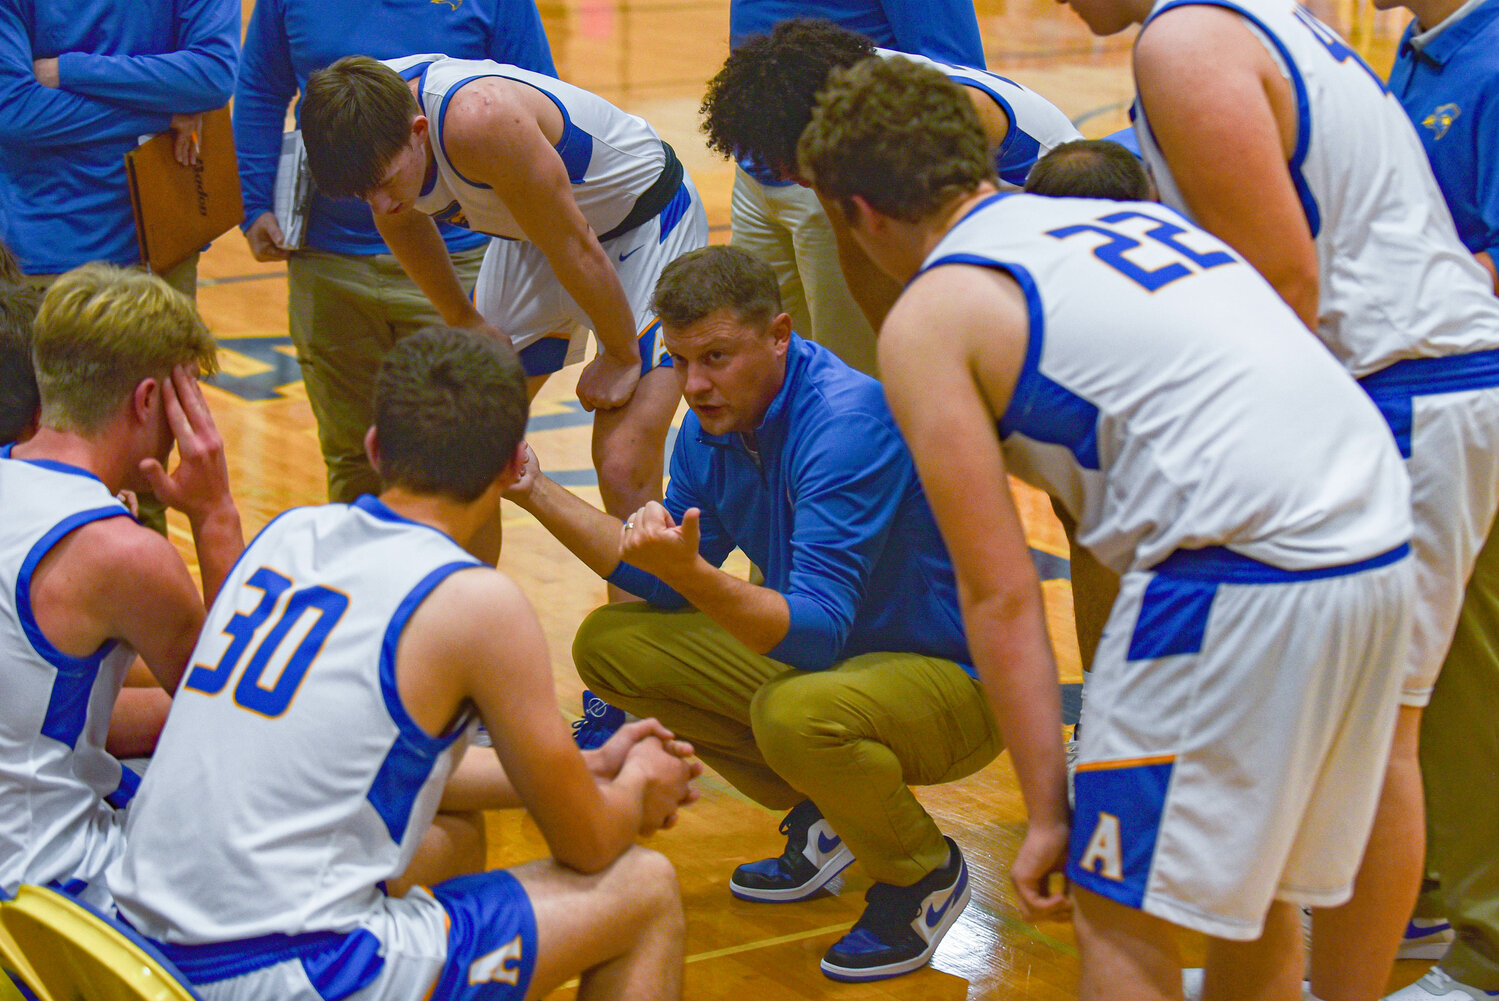 Luke Salme instructs his players during Adna's 78-37 win over Onalaska Dec. 7.